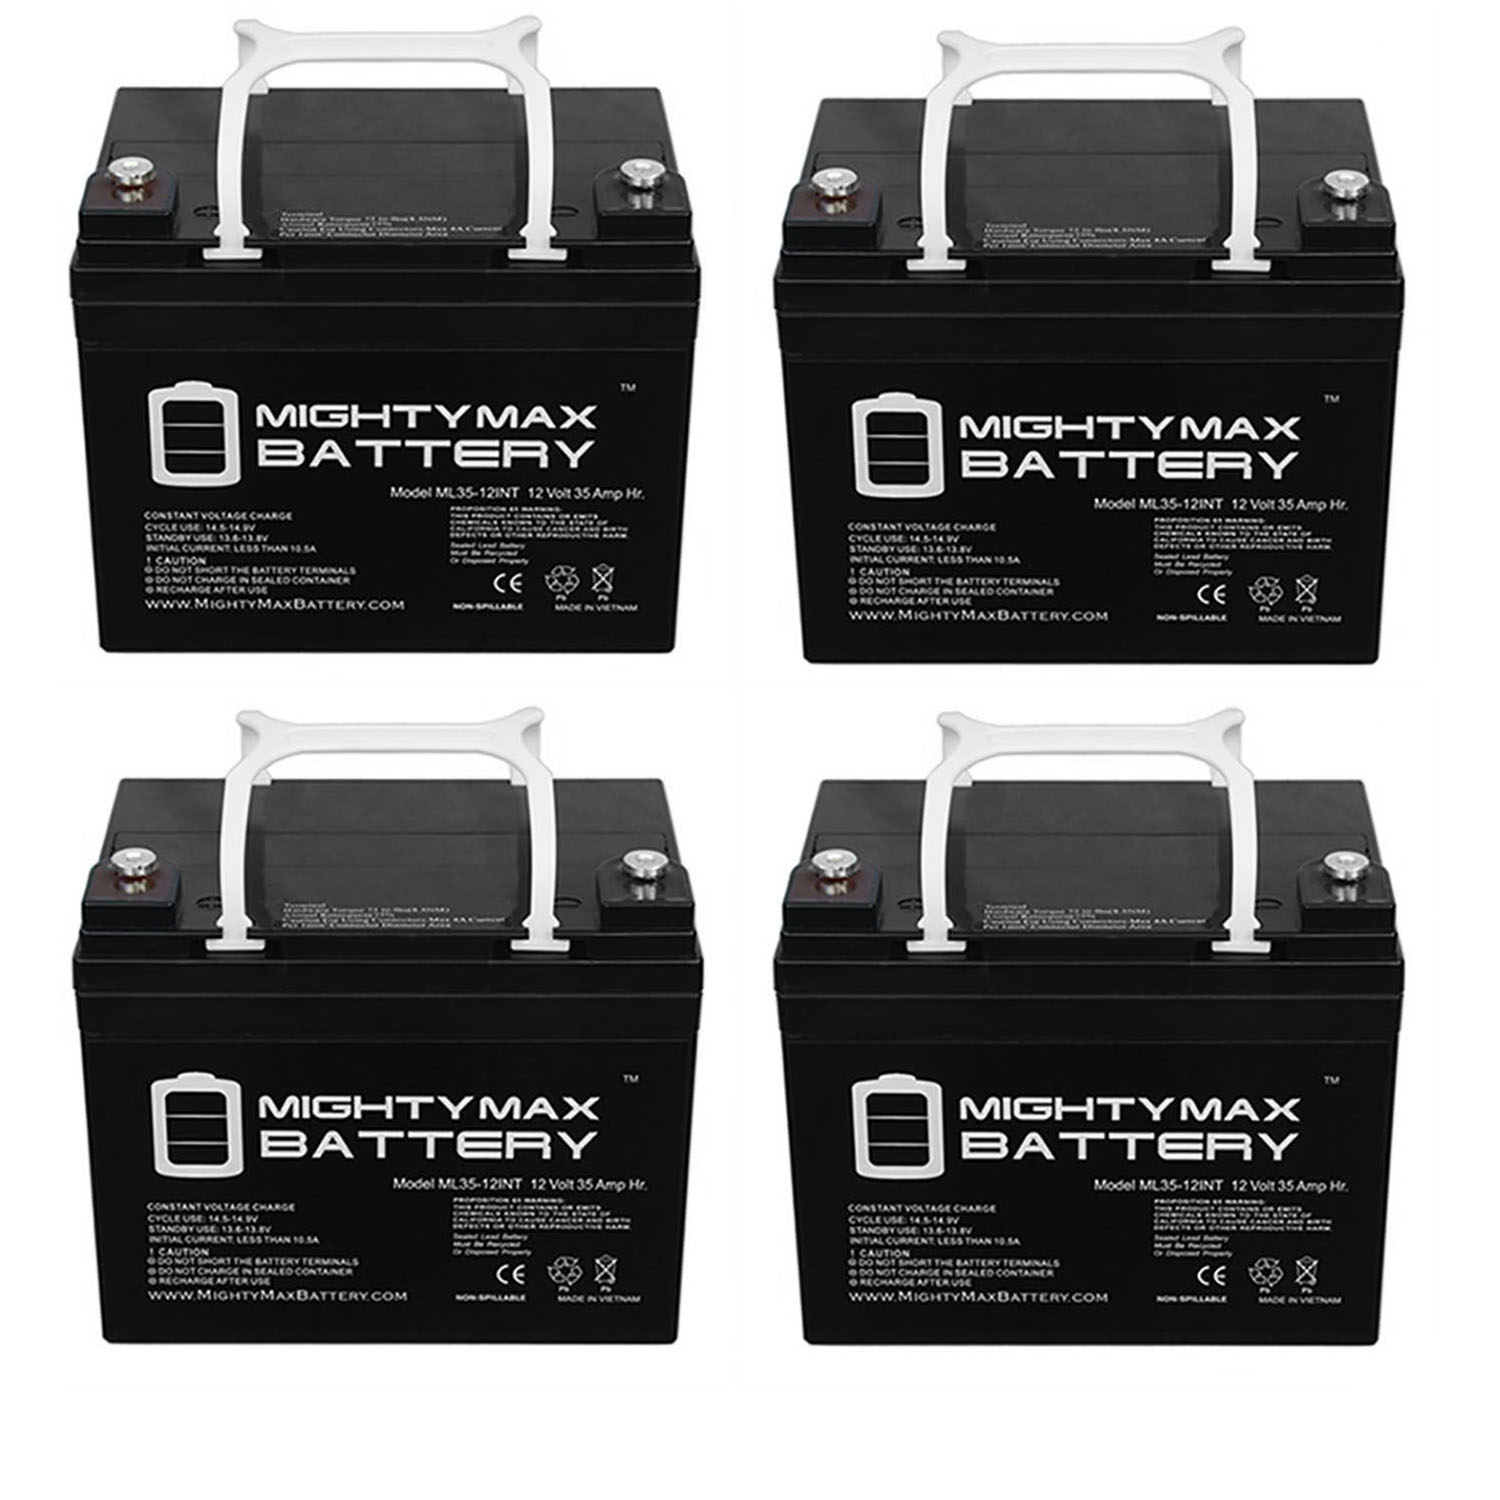 12V 35AH INT Replacement Battery for Zeus Battery PC33-12M - 4 Pack